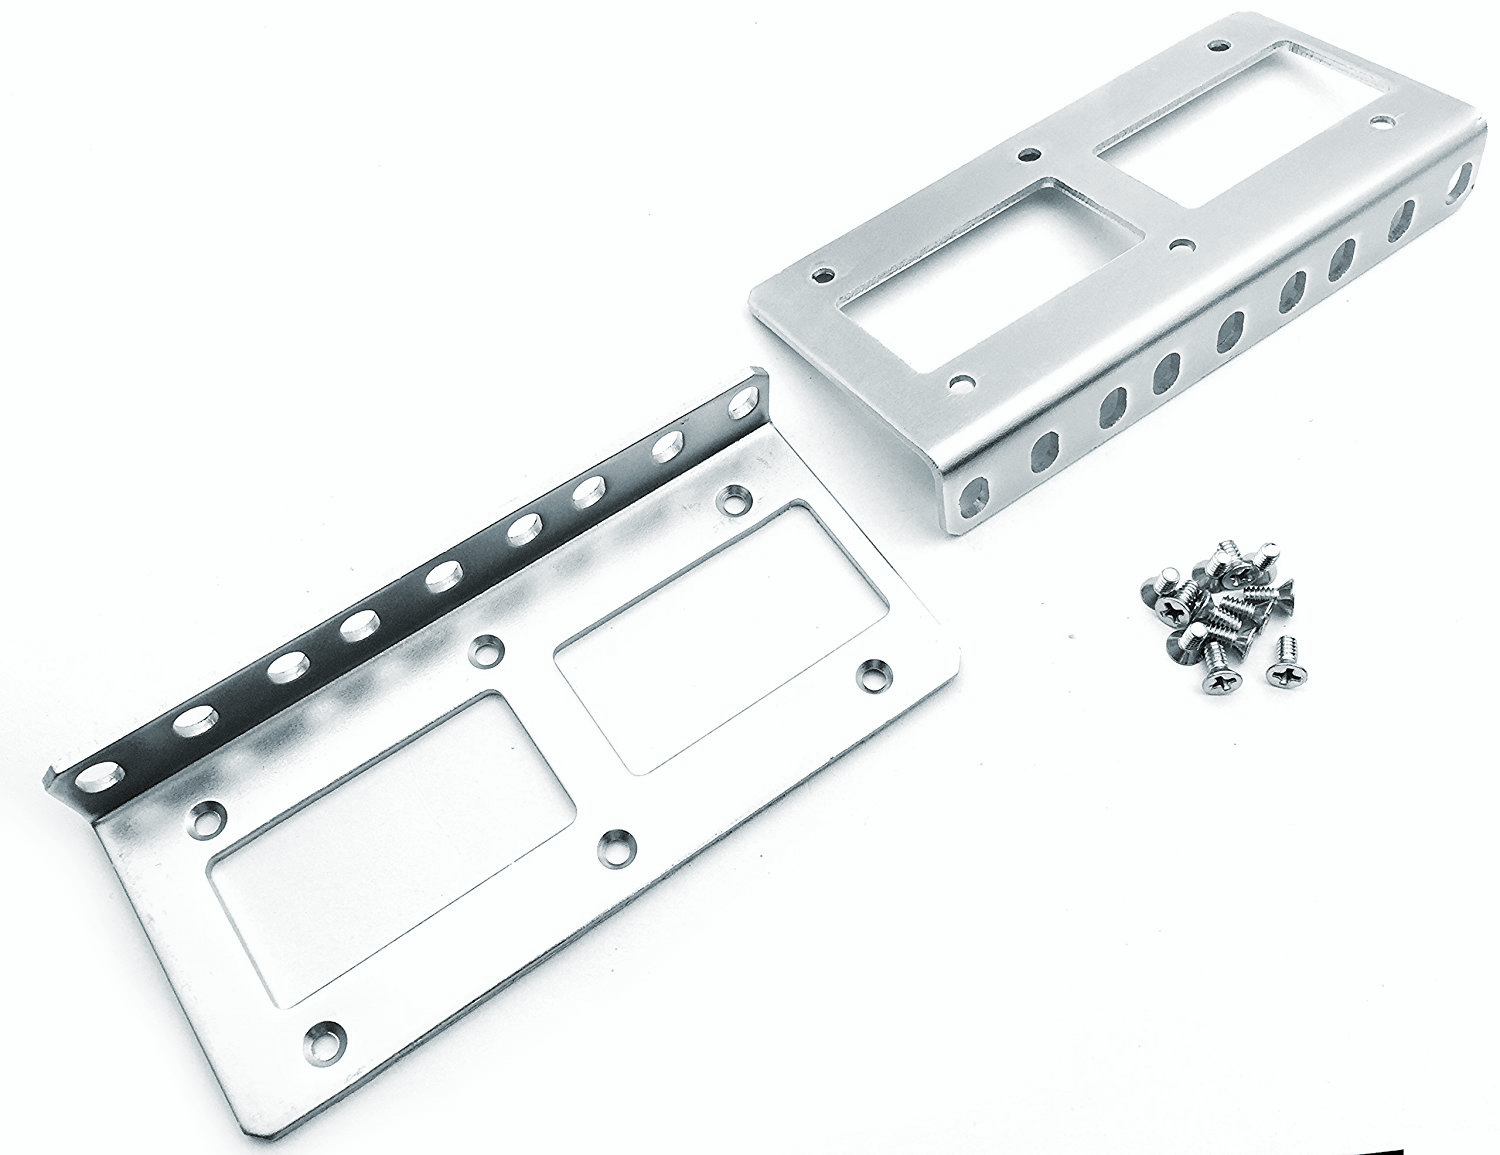 19" Rack Mount Kit for Cisco 3900 Routers - Click Image to Close